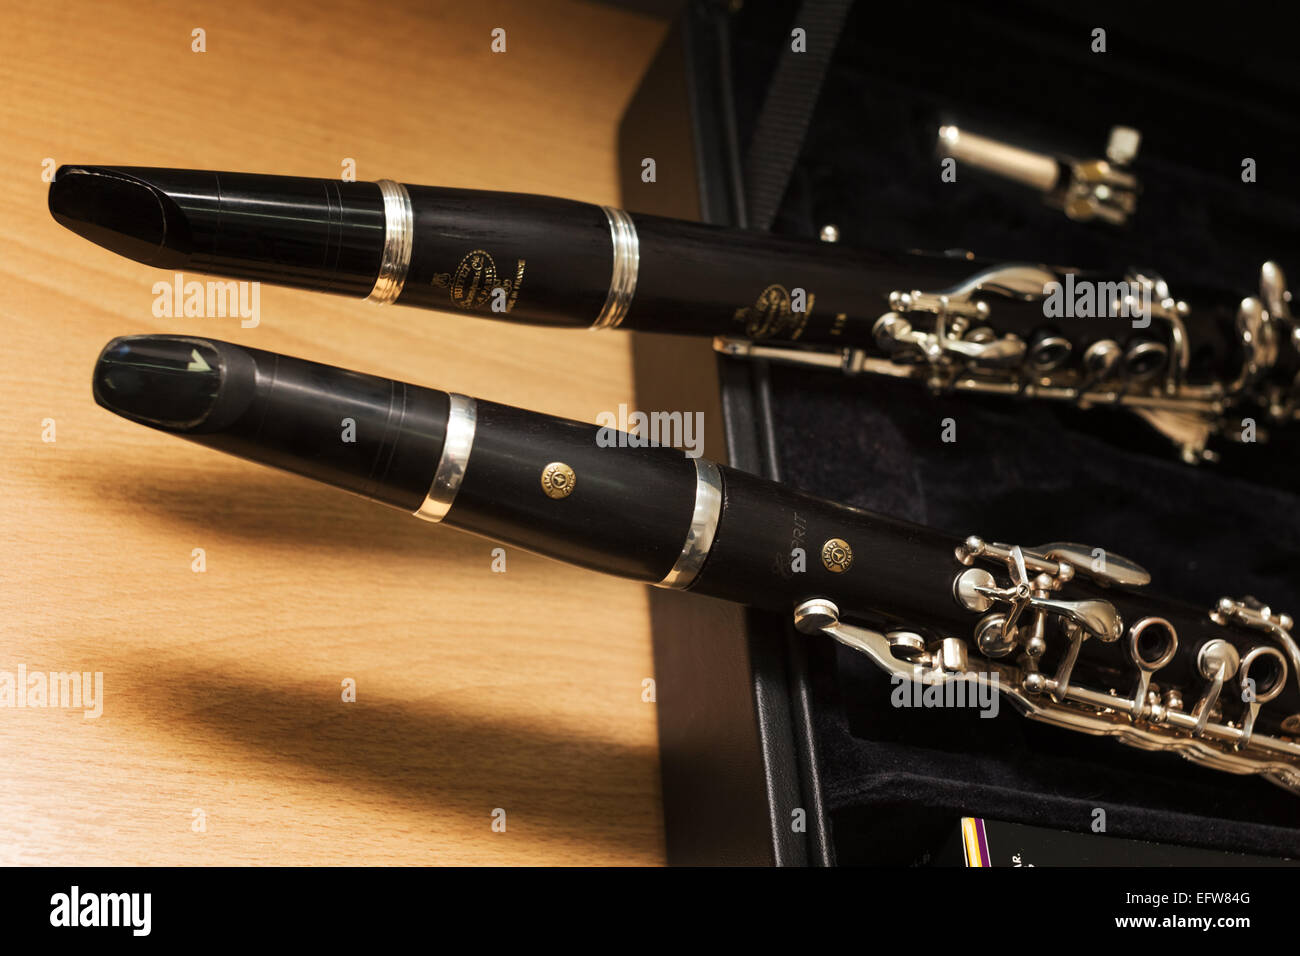 Clarinets in a case for transportation. Stock Photo